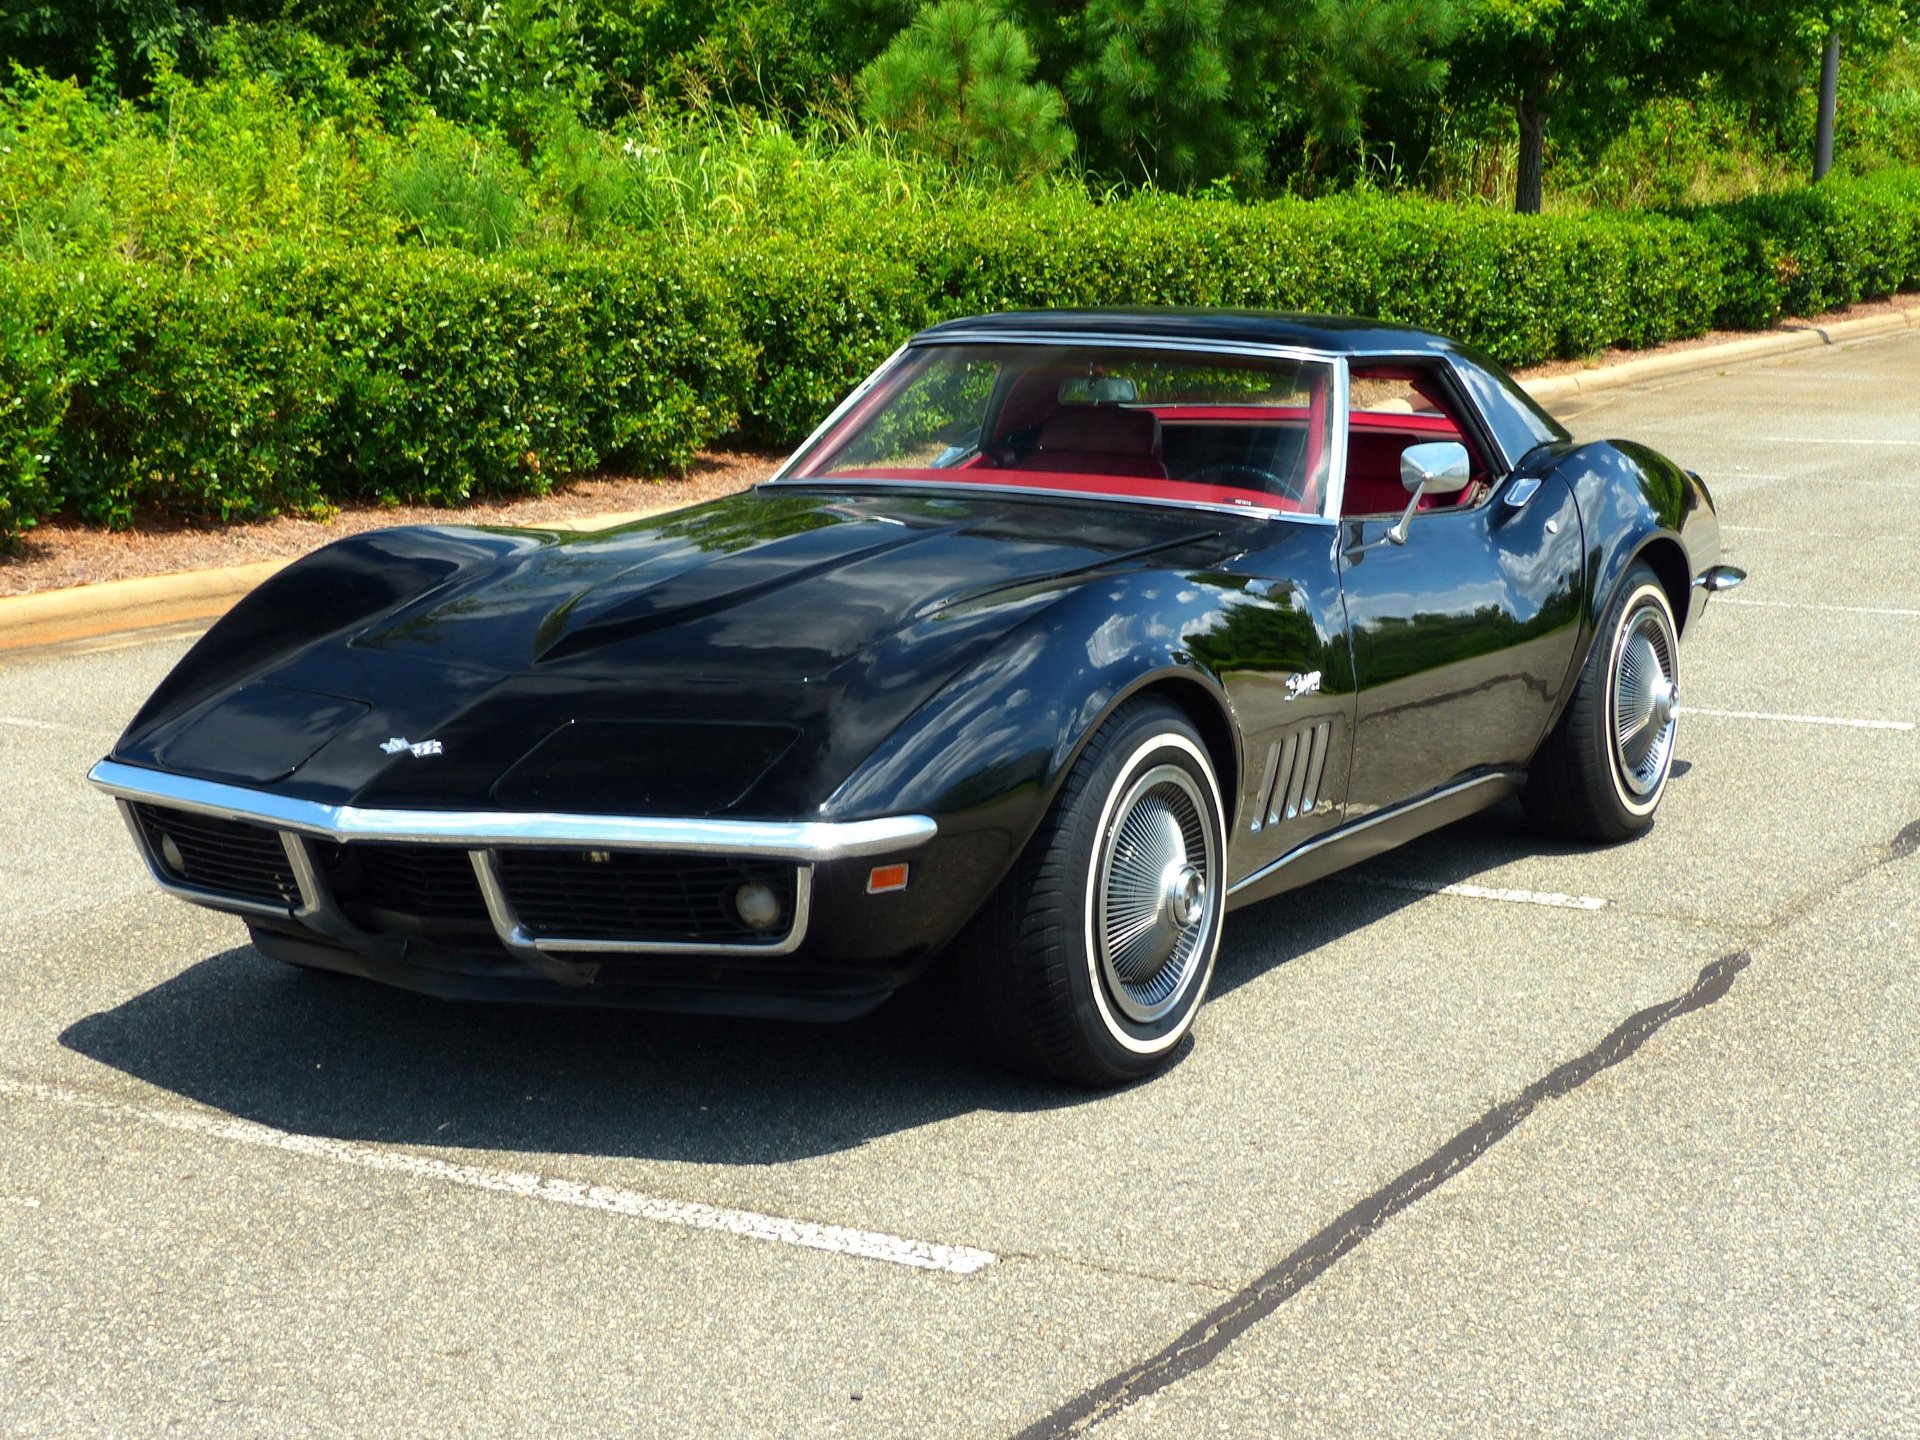 A sleek, black classic car with a low profile and stylish curves is parked in a lot. Its polished body shines under the sunlight, highlighting its vintage design. The car has a red interior, and a wooded area with greenery can be seen in the background—a true gem among classic cars. | MONEY6X